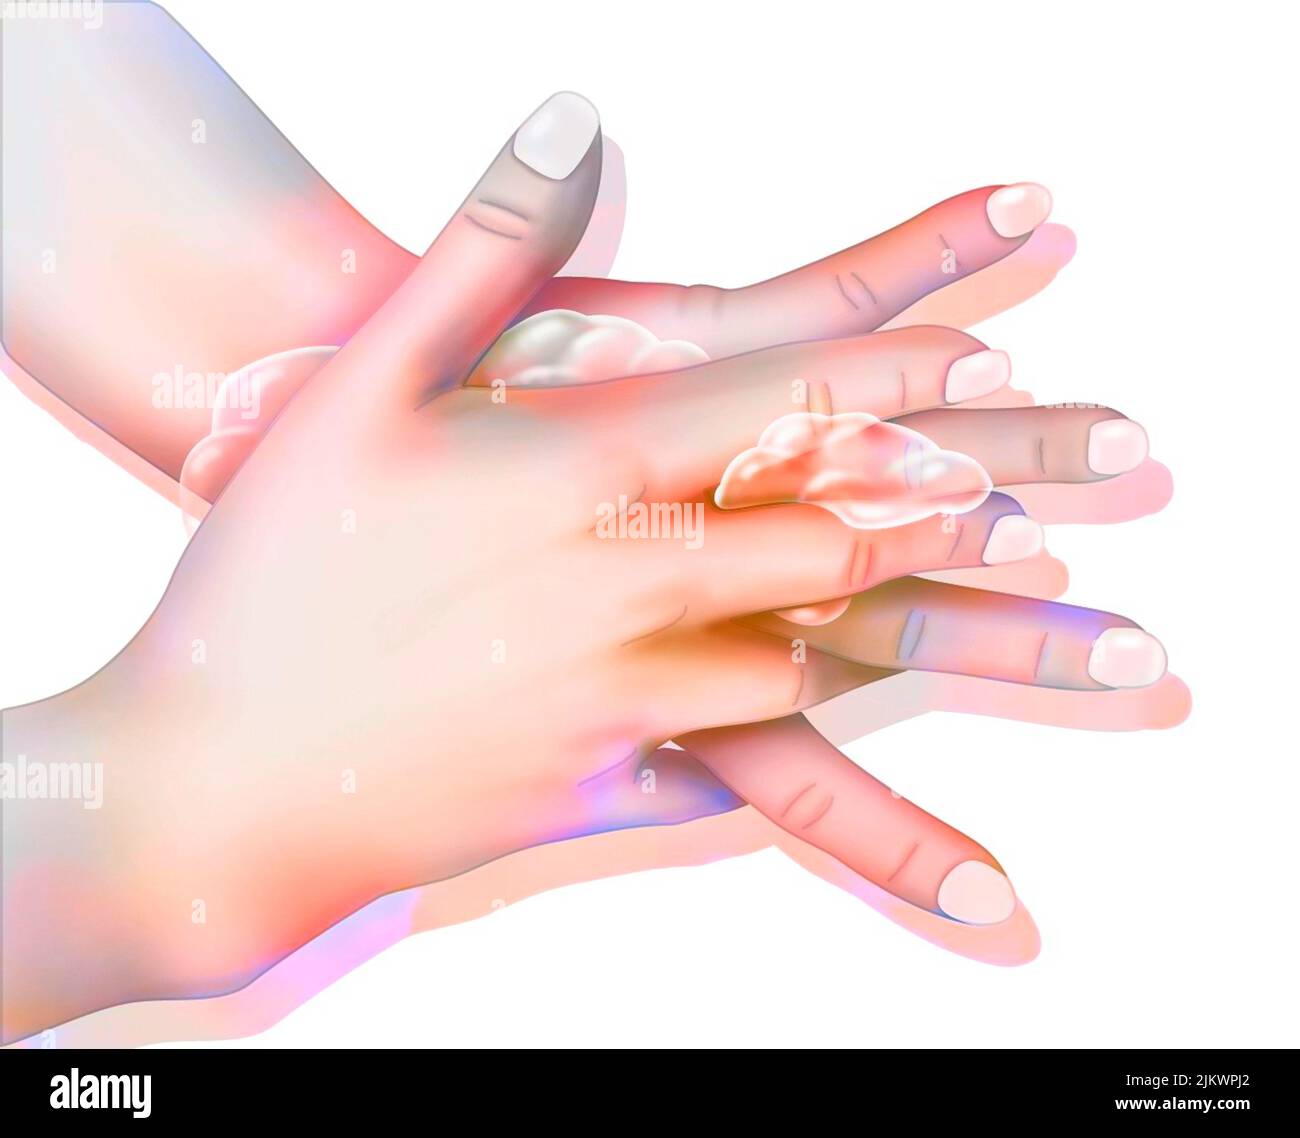 Hygiene: hand washing by rubbing between the fingers. Stock Photo